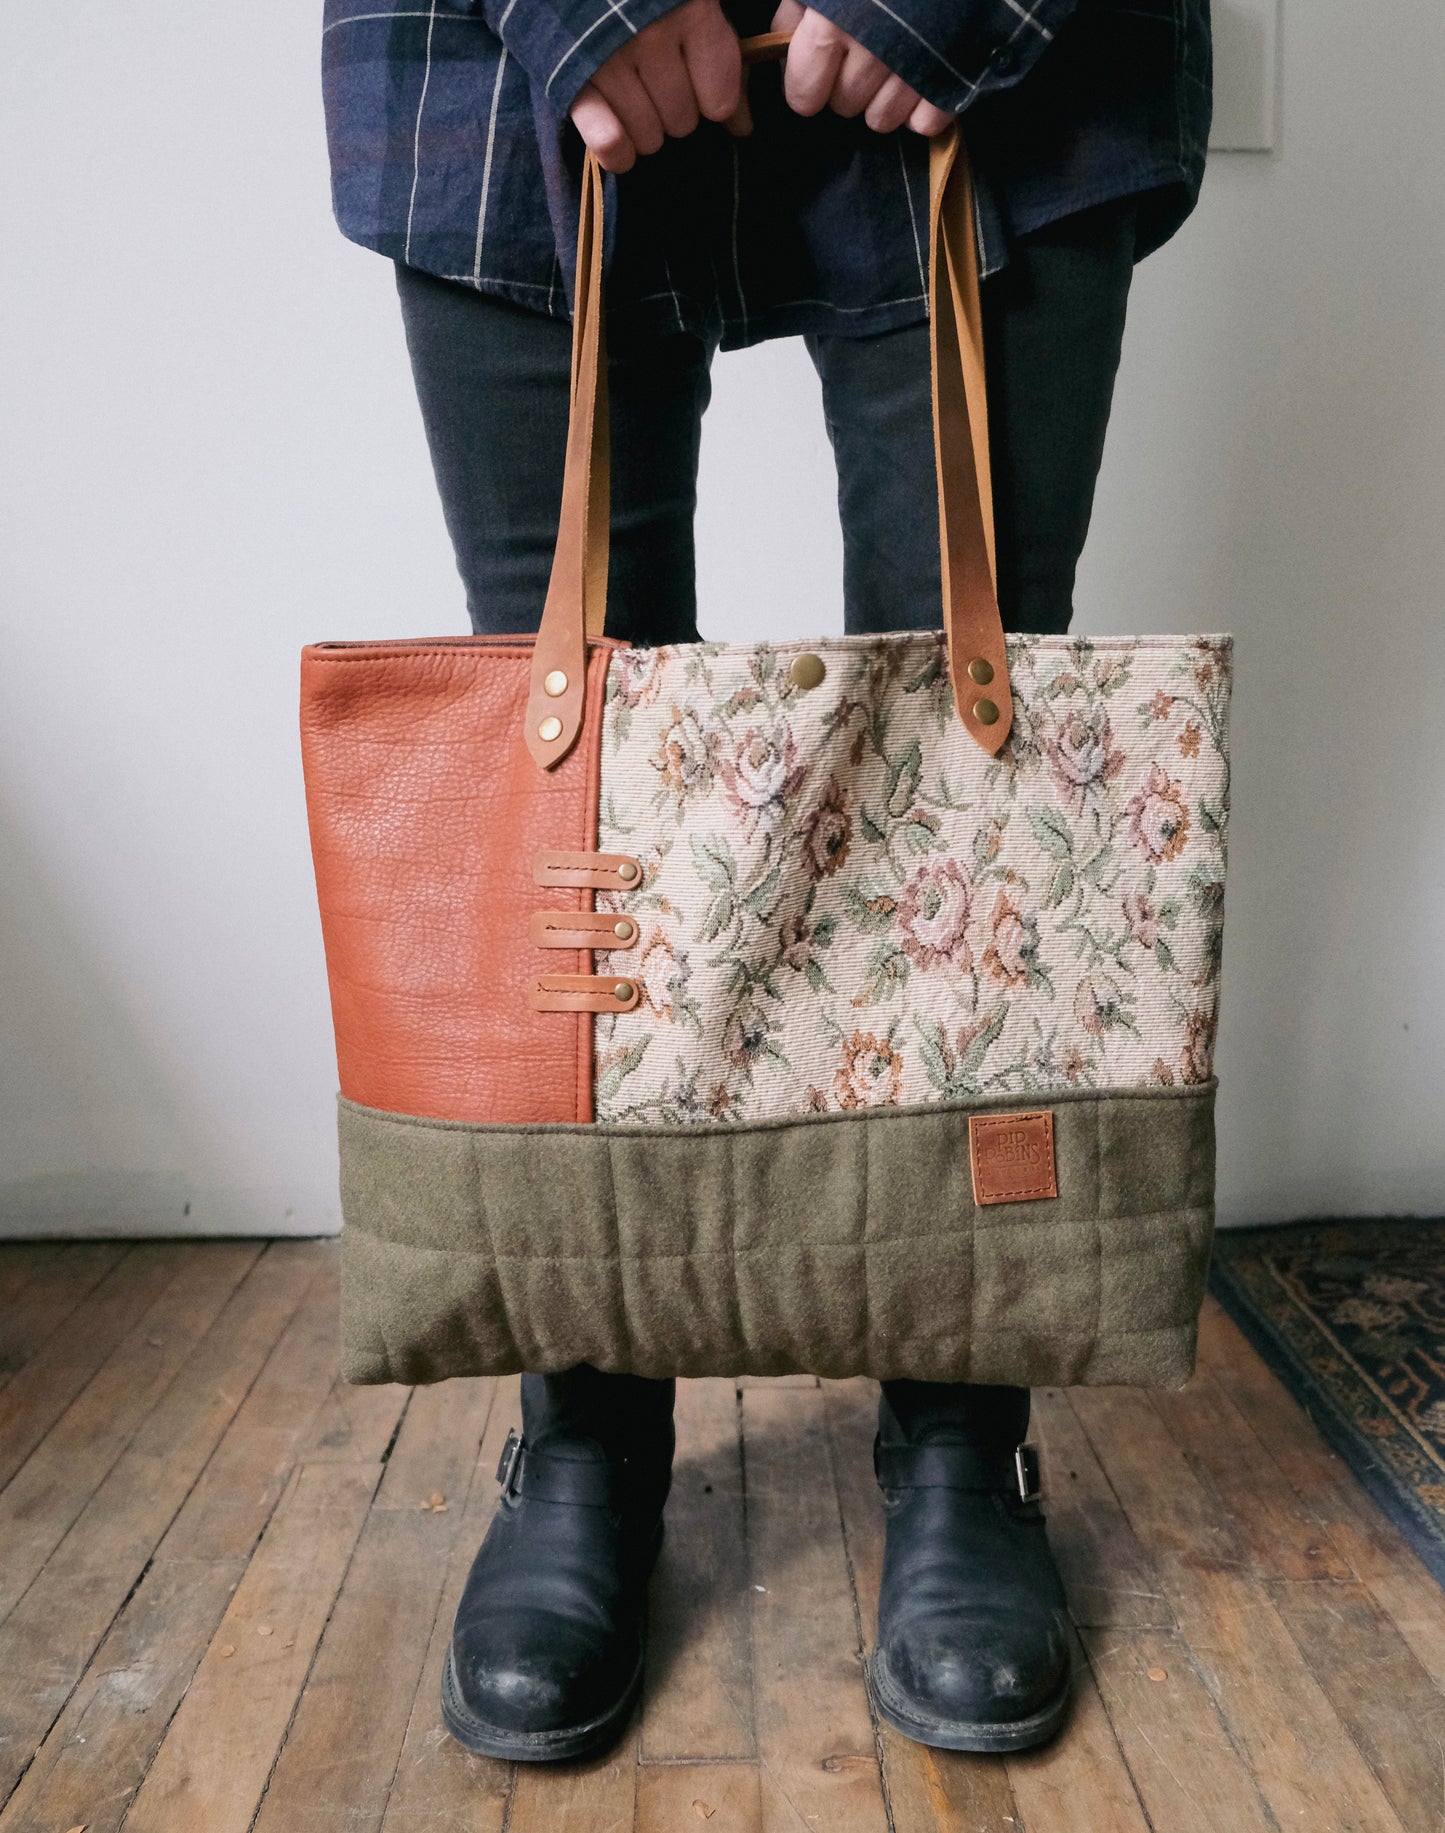 Large Quilted Carry-All Tote No. 22